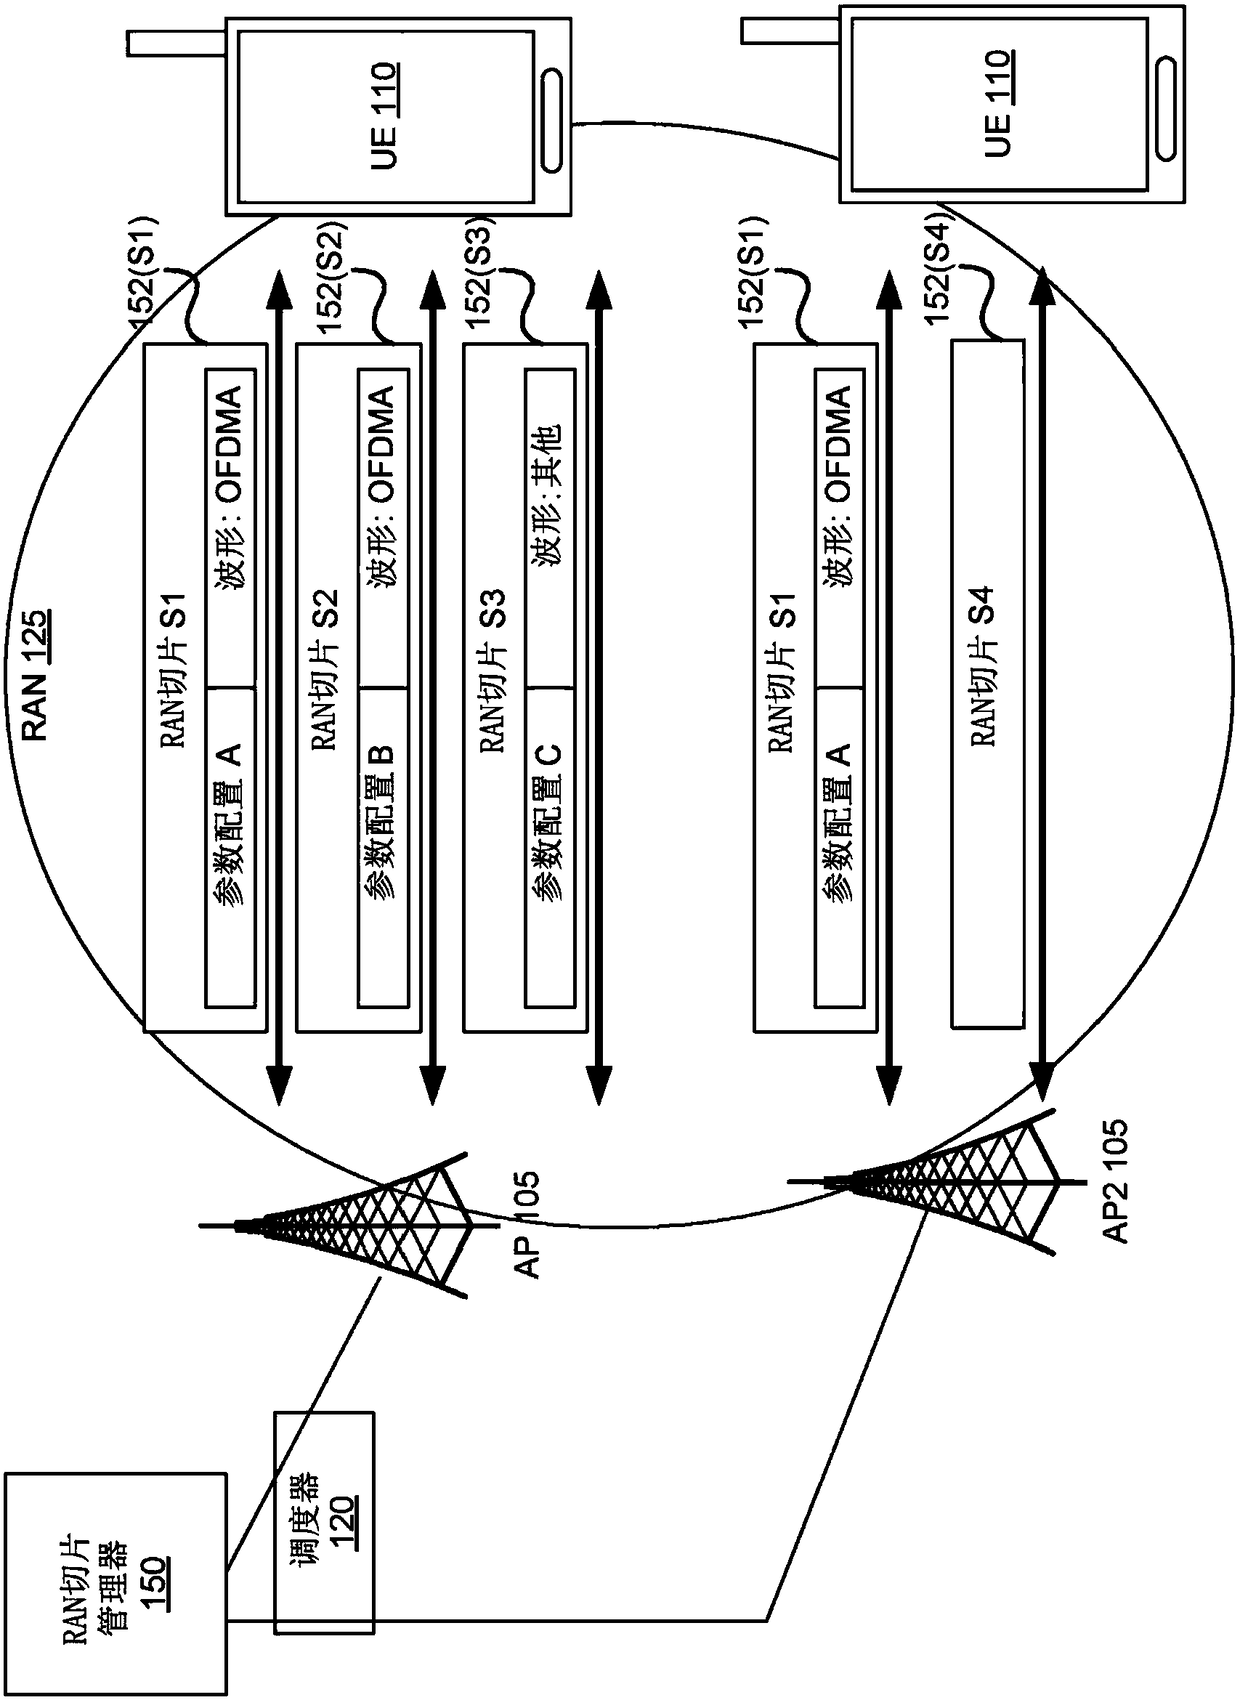 Method and system for performing network slicing in a radio access network